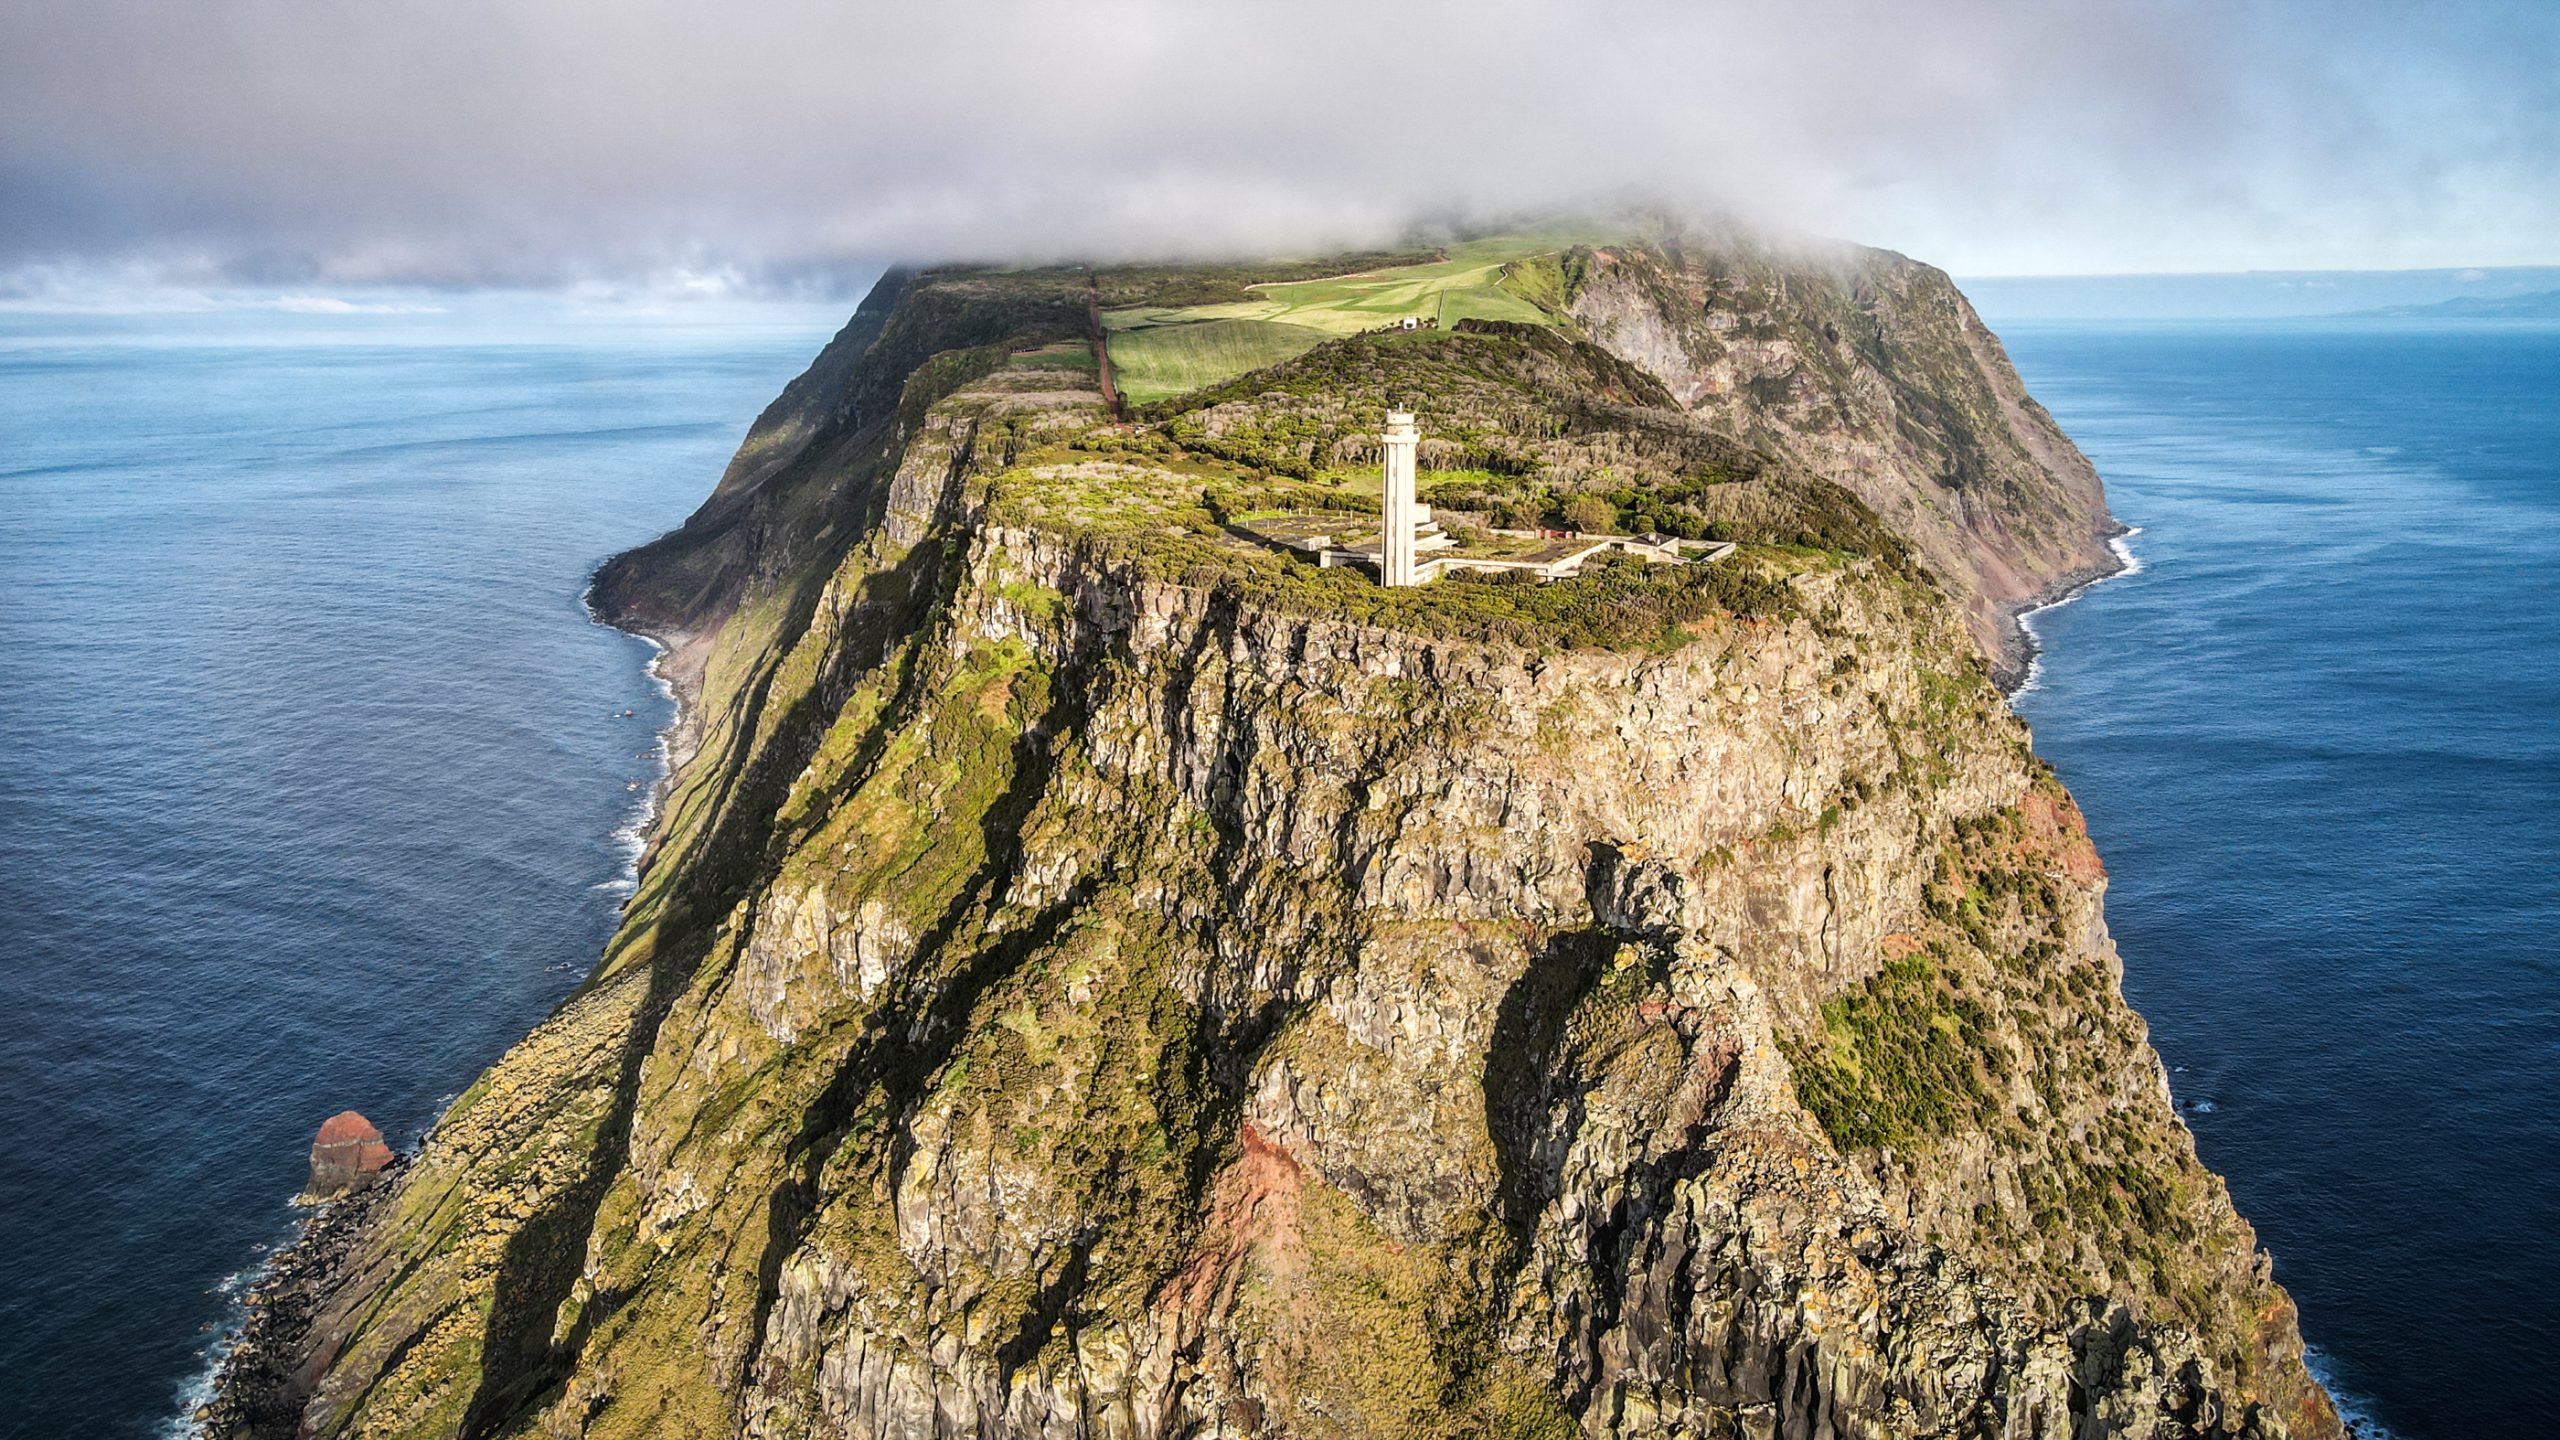 São Jorge: the most spectacular fajãs in the Azores - Pin Your